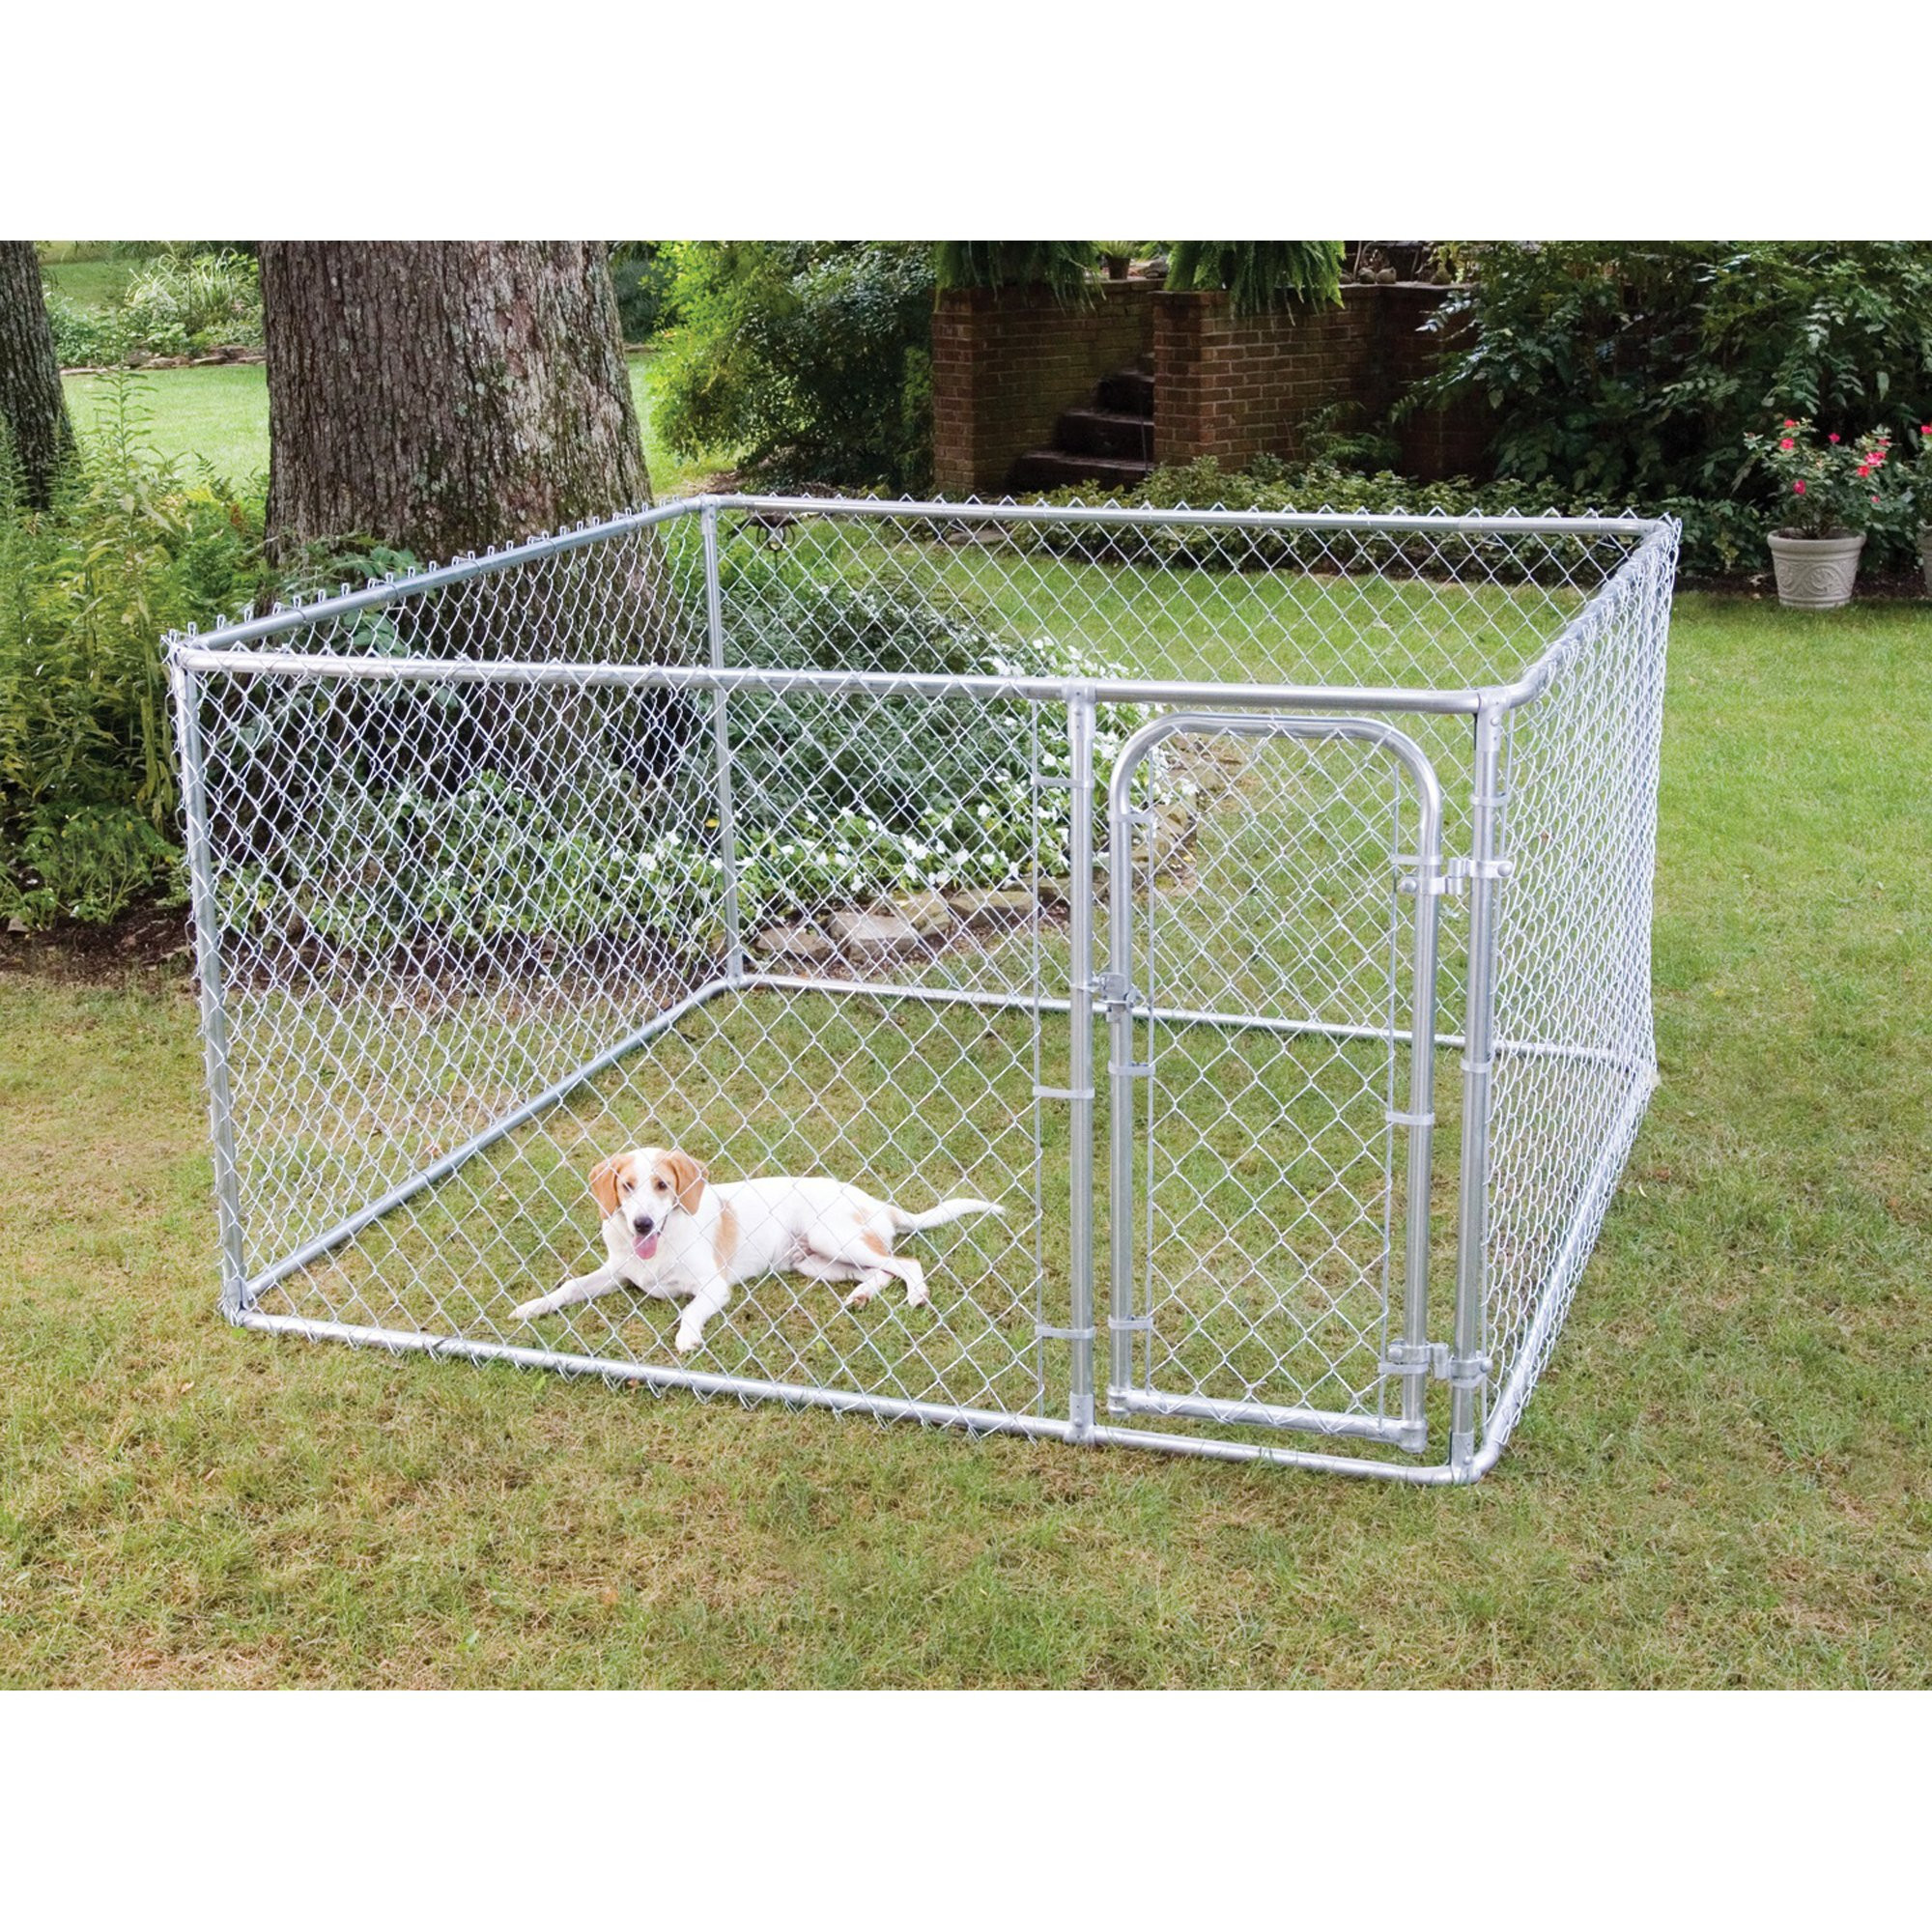 DIY Indoor Dog Fence
 FenceMaster Do It Yourself Chain Link Kennel